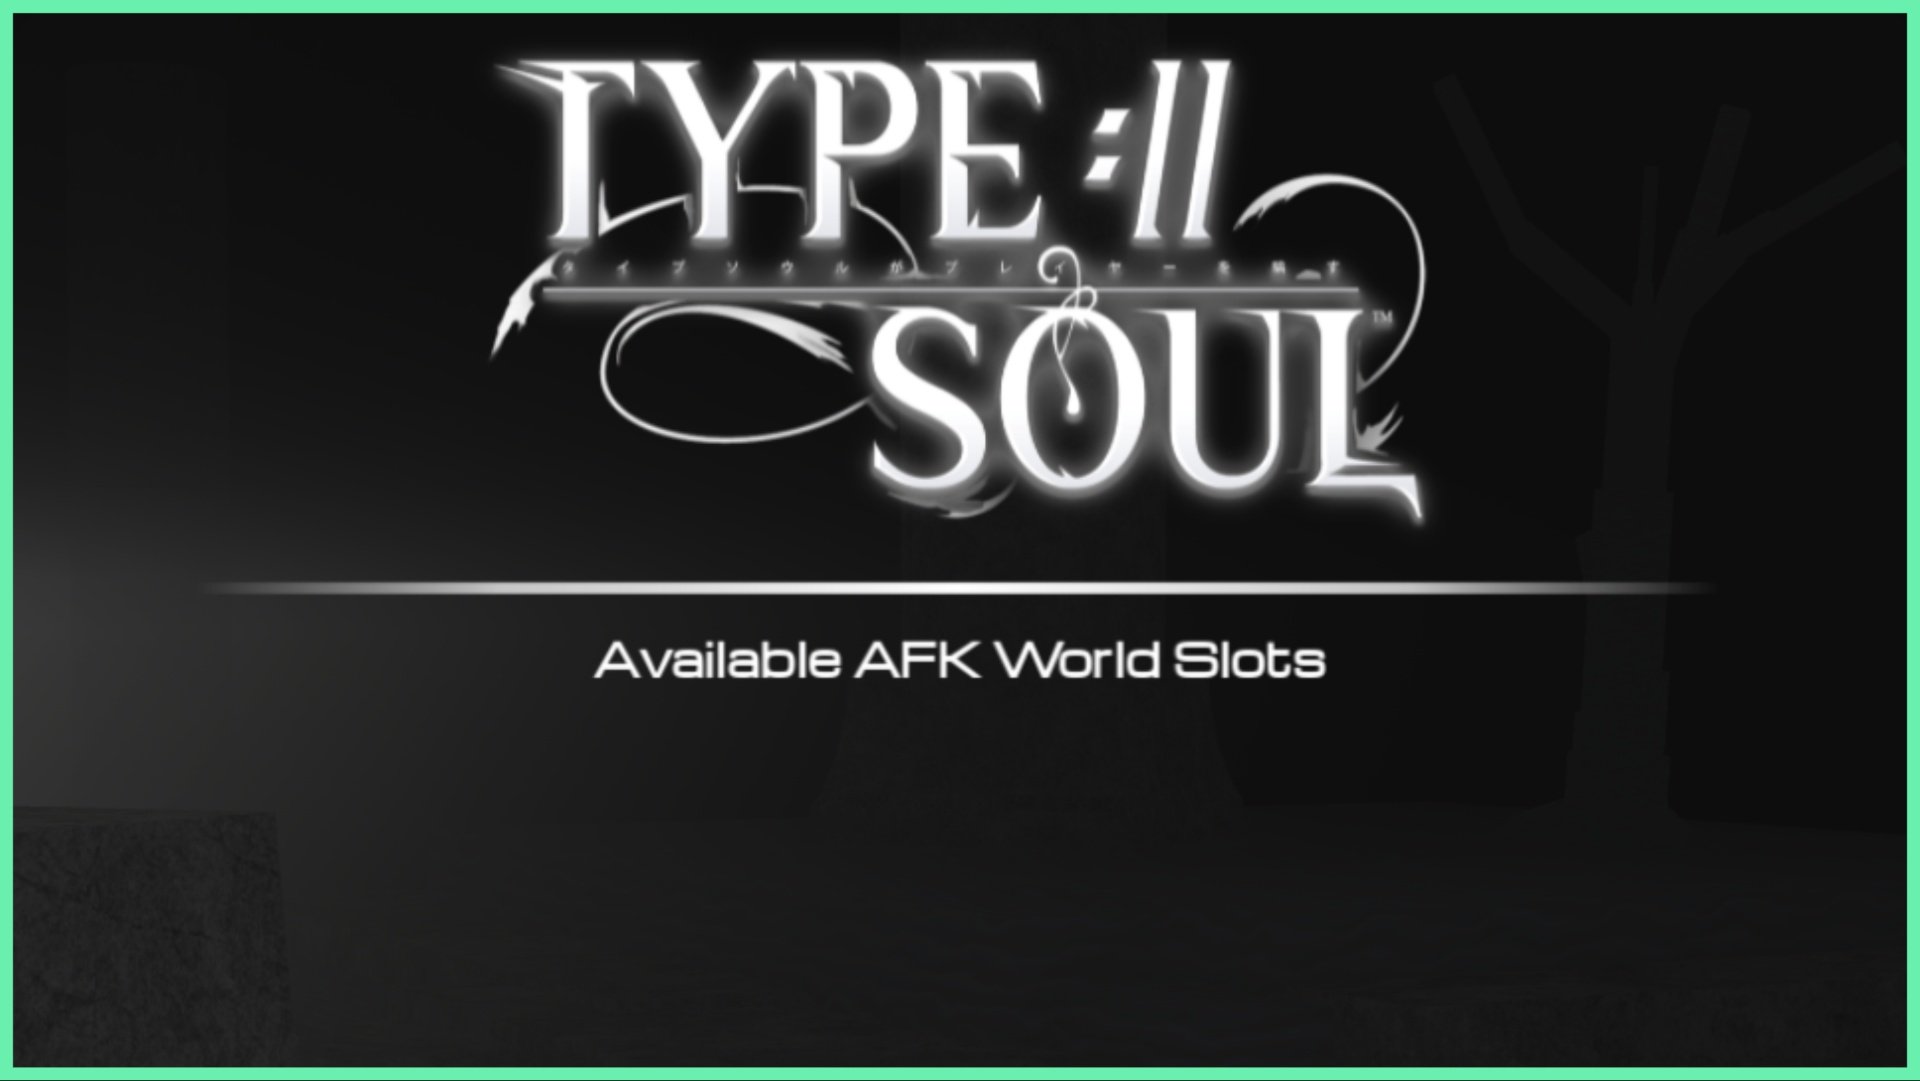 Feature image for our Type Soul World Ticket guide showing the afk world screen from the menu page which is all black with the type soul logo across the top. Beneath that is a slot of text to show available AFK World slots